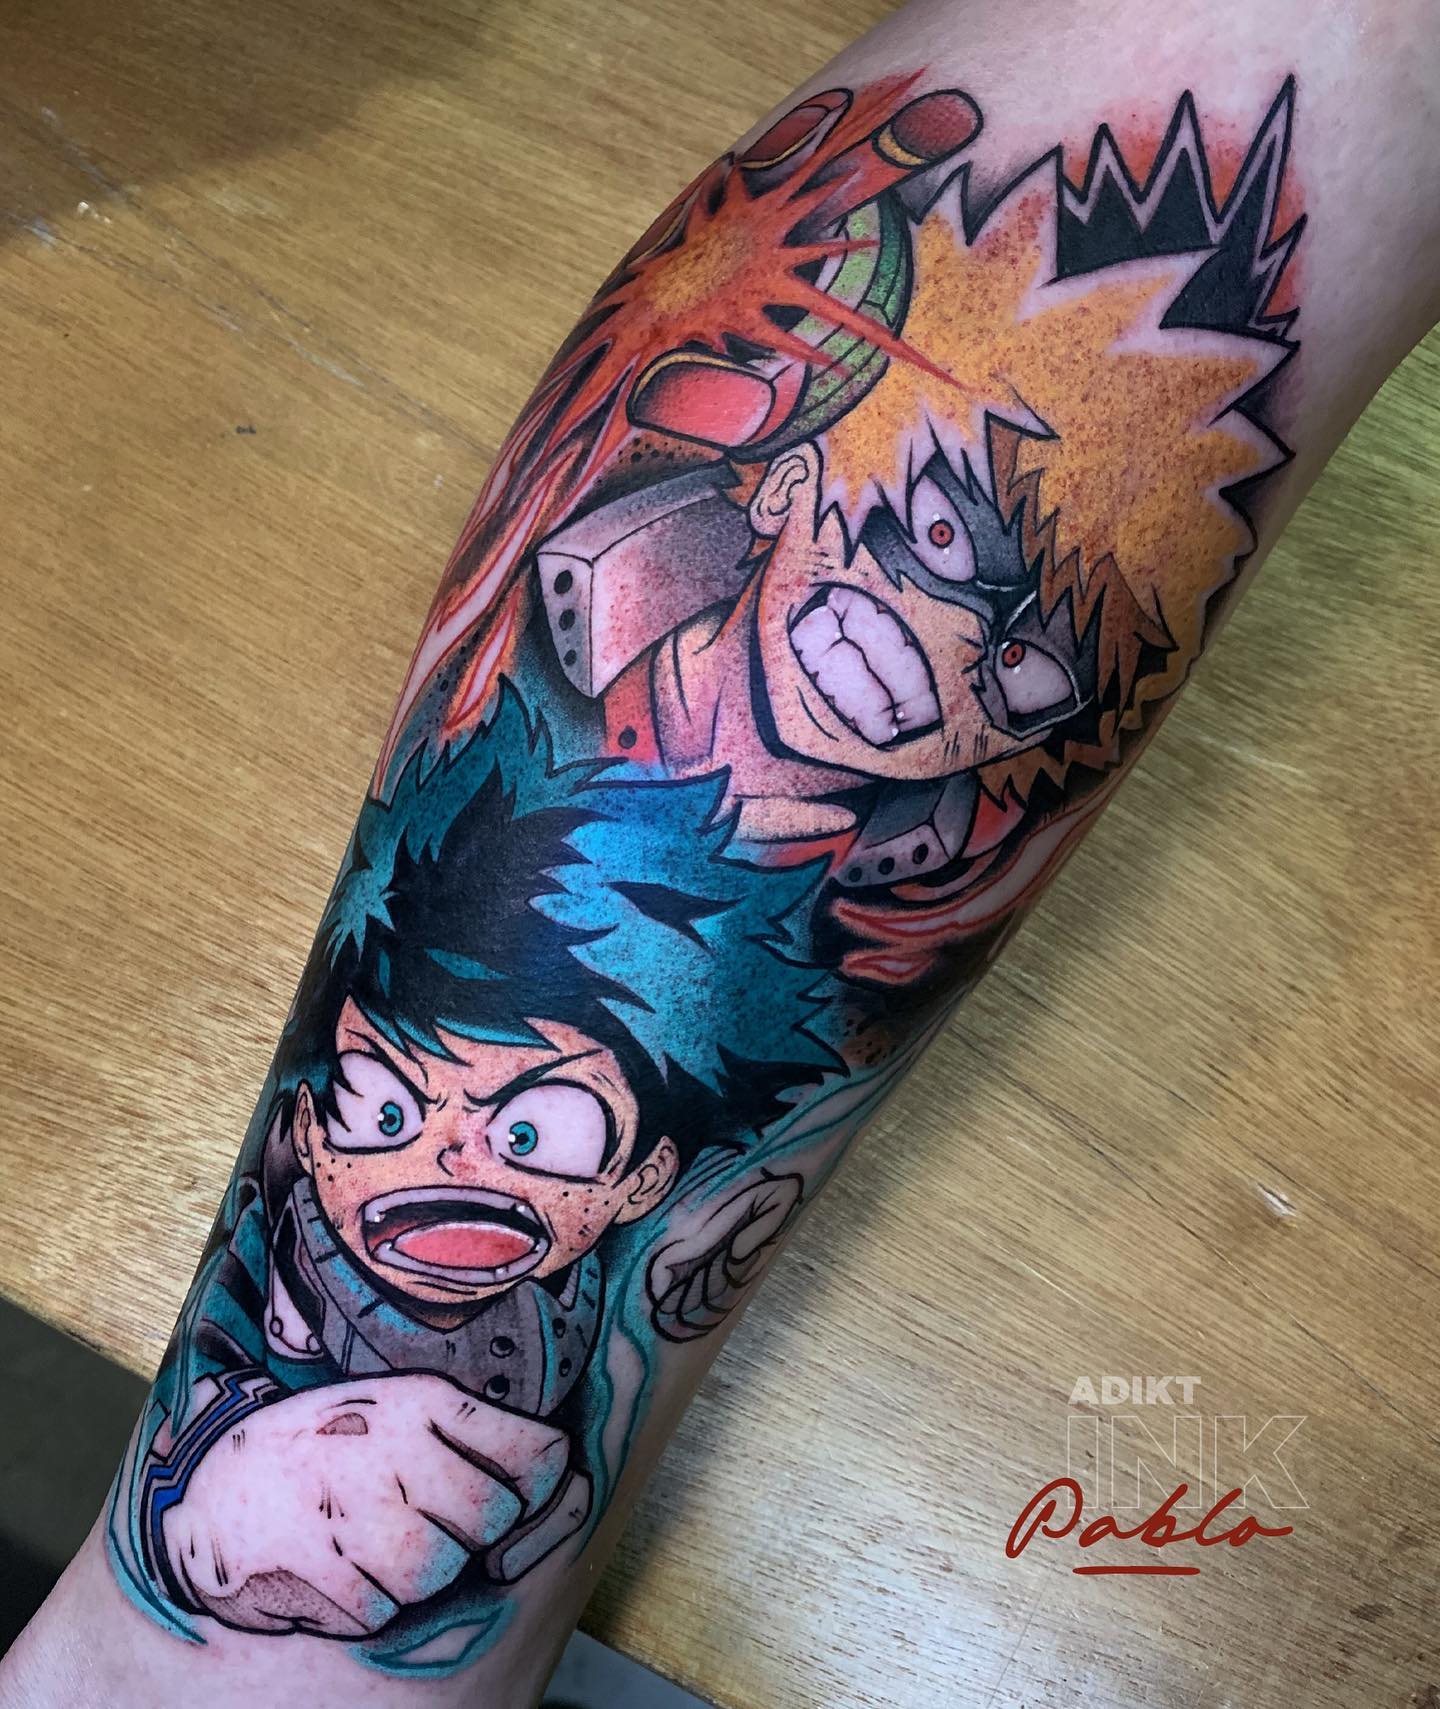 33+ Anime Tattoo Ideas That Are Too Cool for Skool